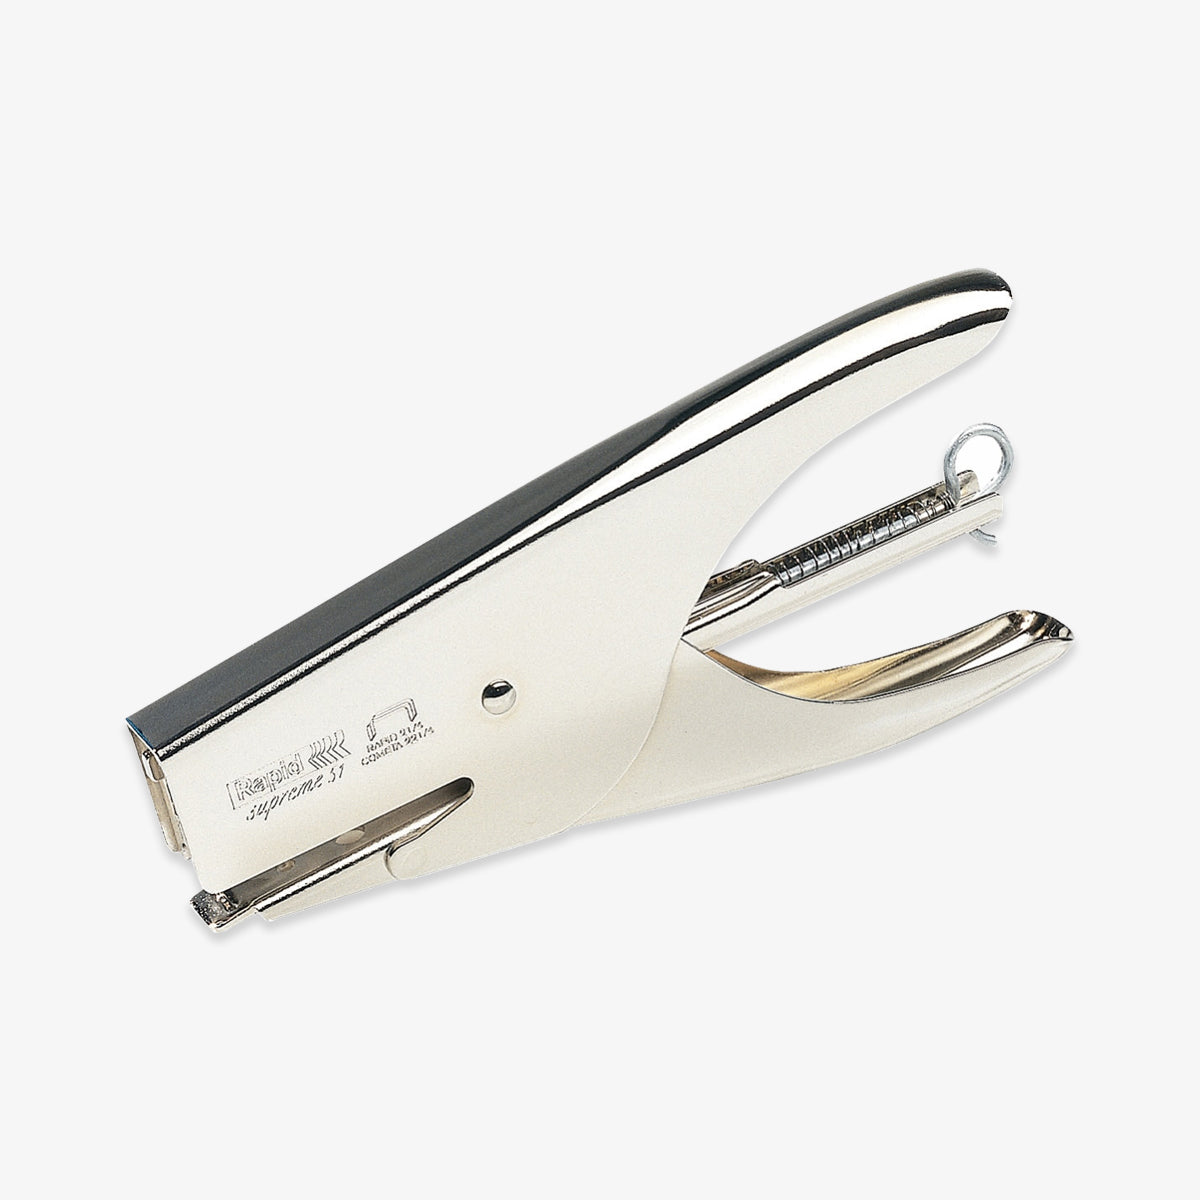 products/Rapid_s51_Stapler_Silver_01.jpg